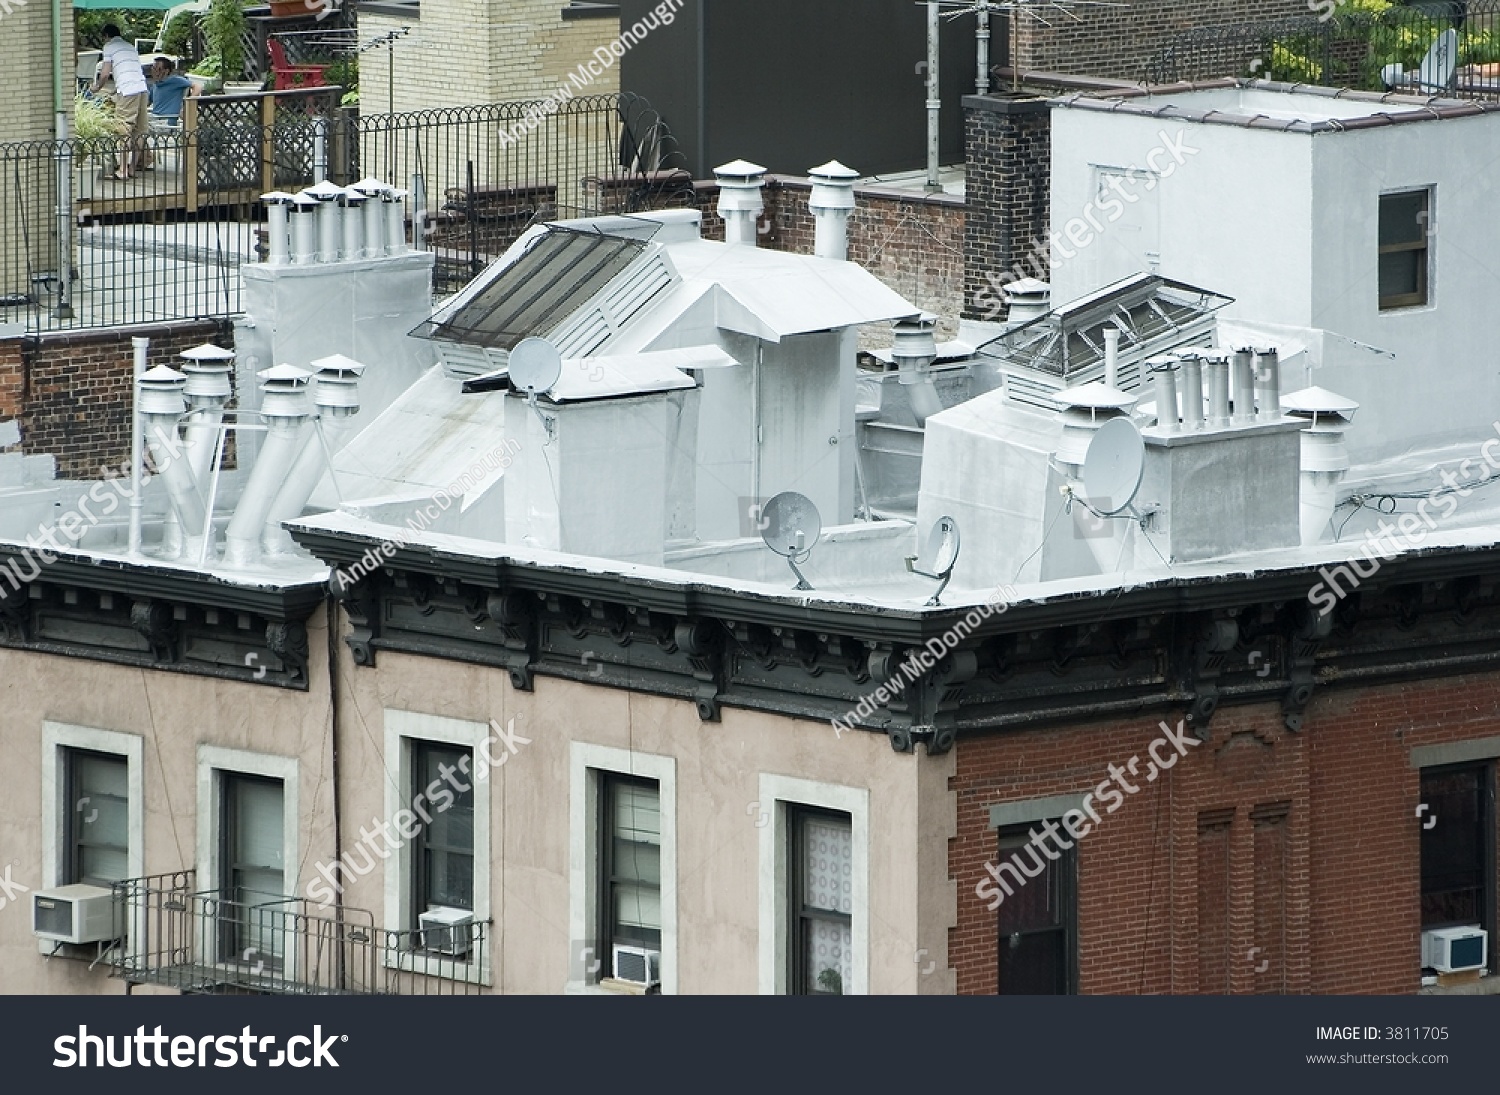 stock-photo-roof-top-of-an-apartment-bui